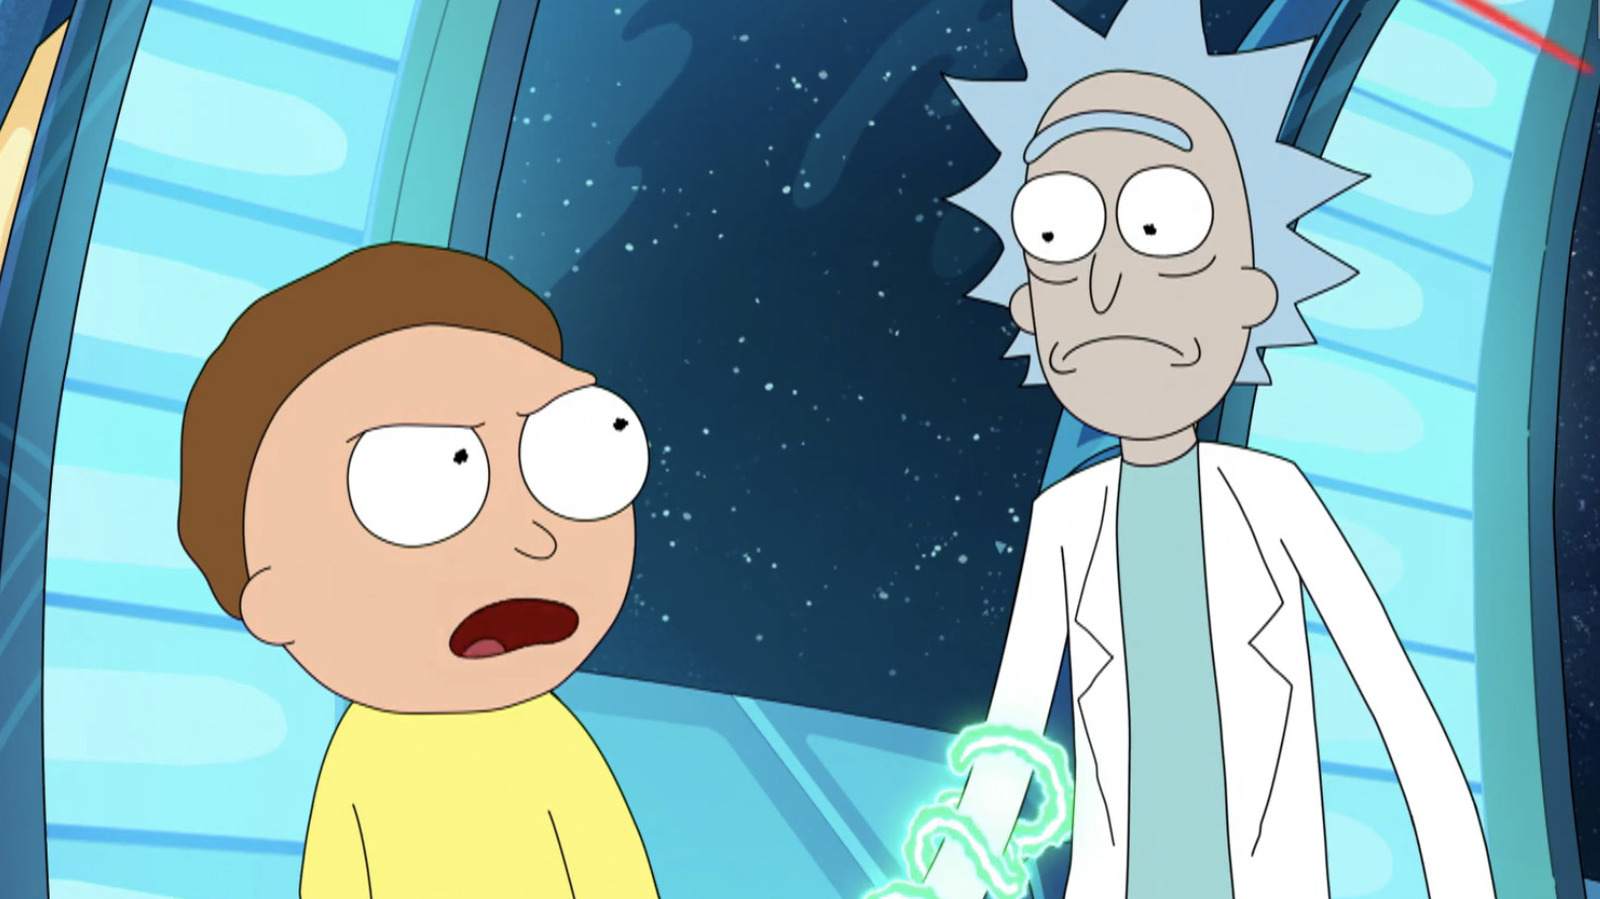 Rick and Morty' season 7 premiere: How to watch, where to stream 